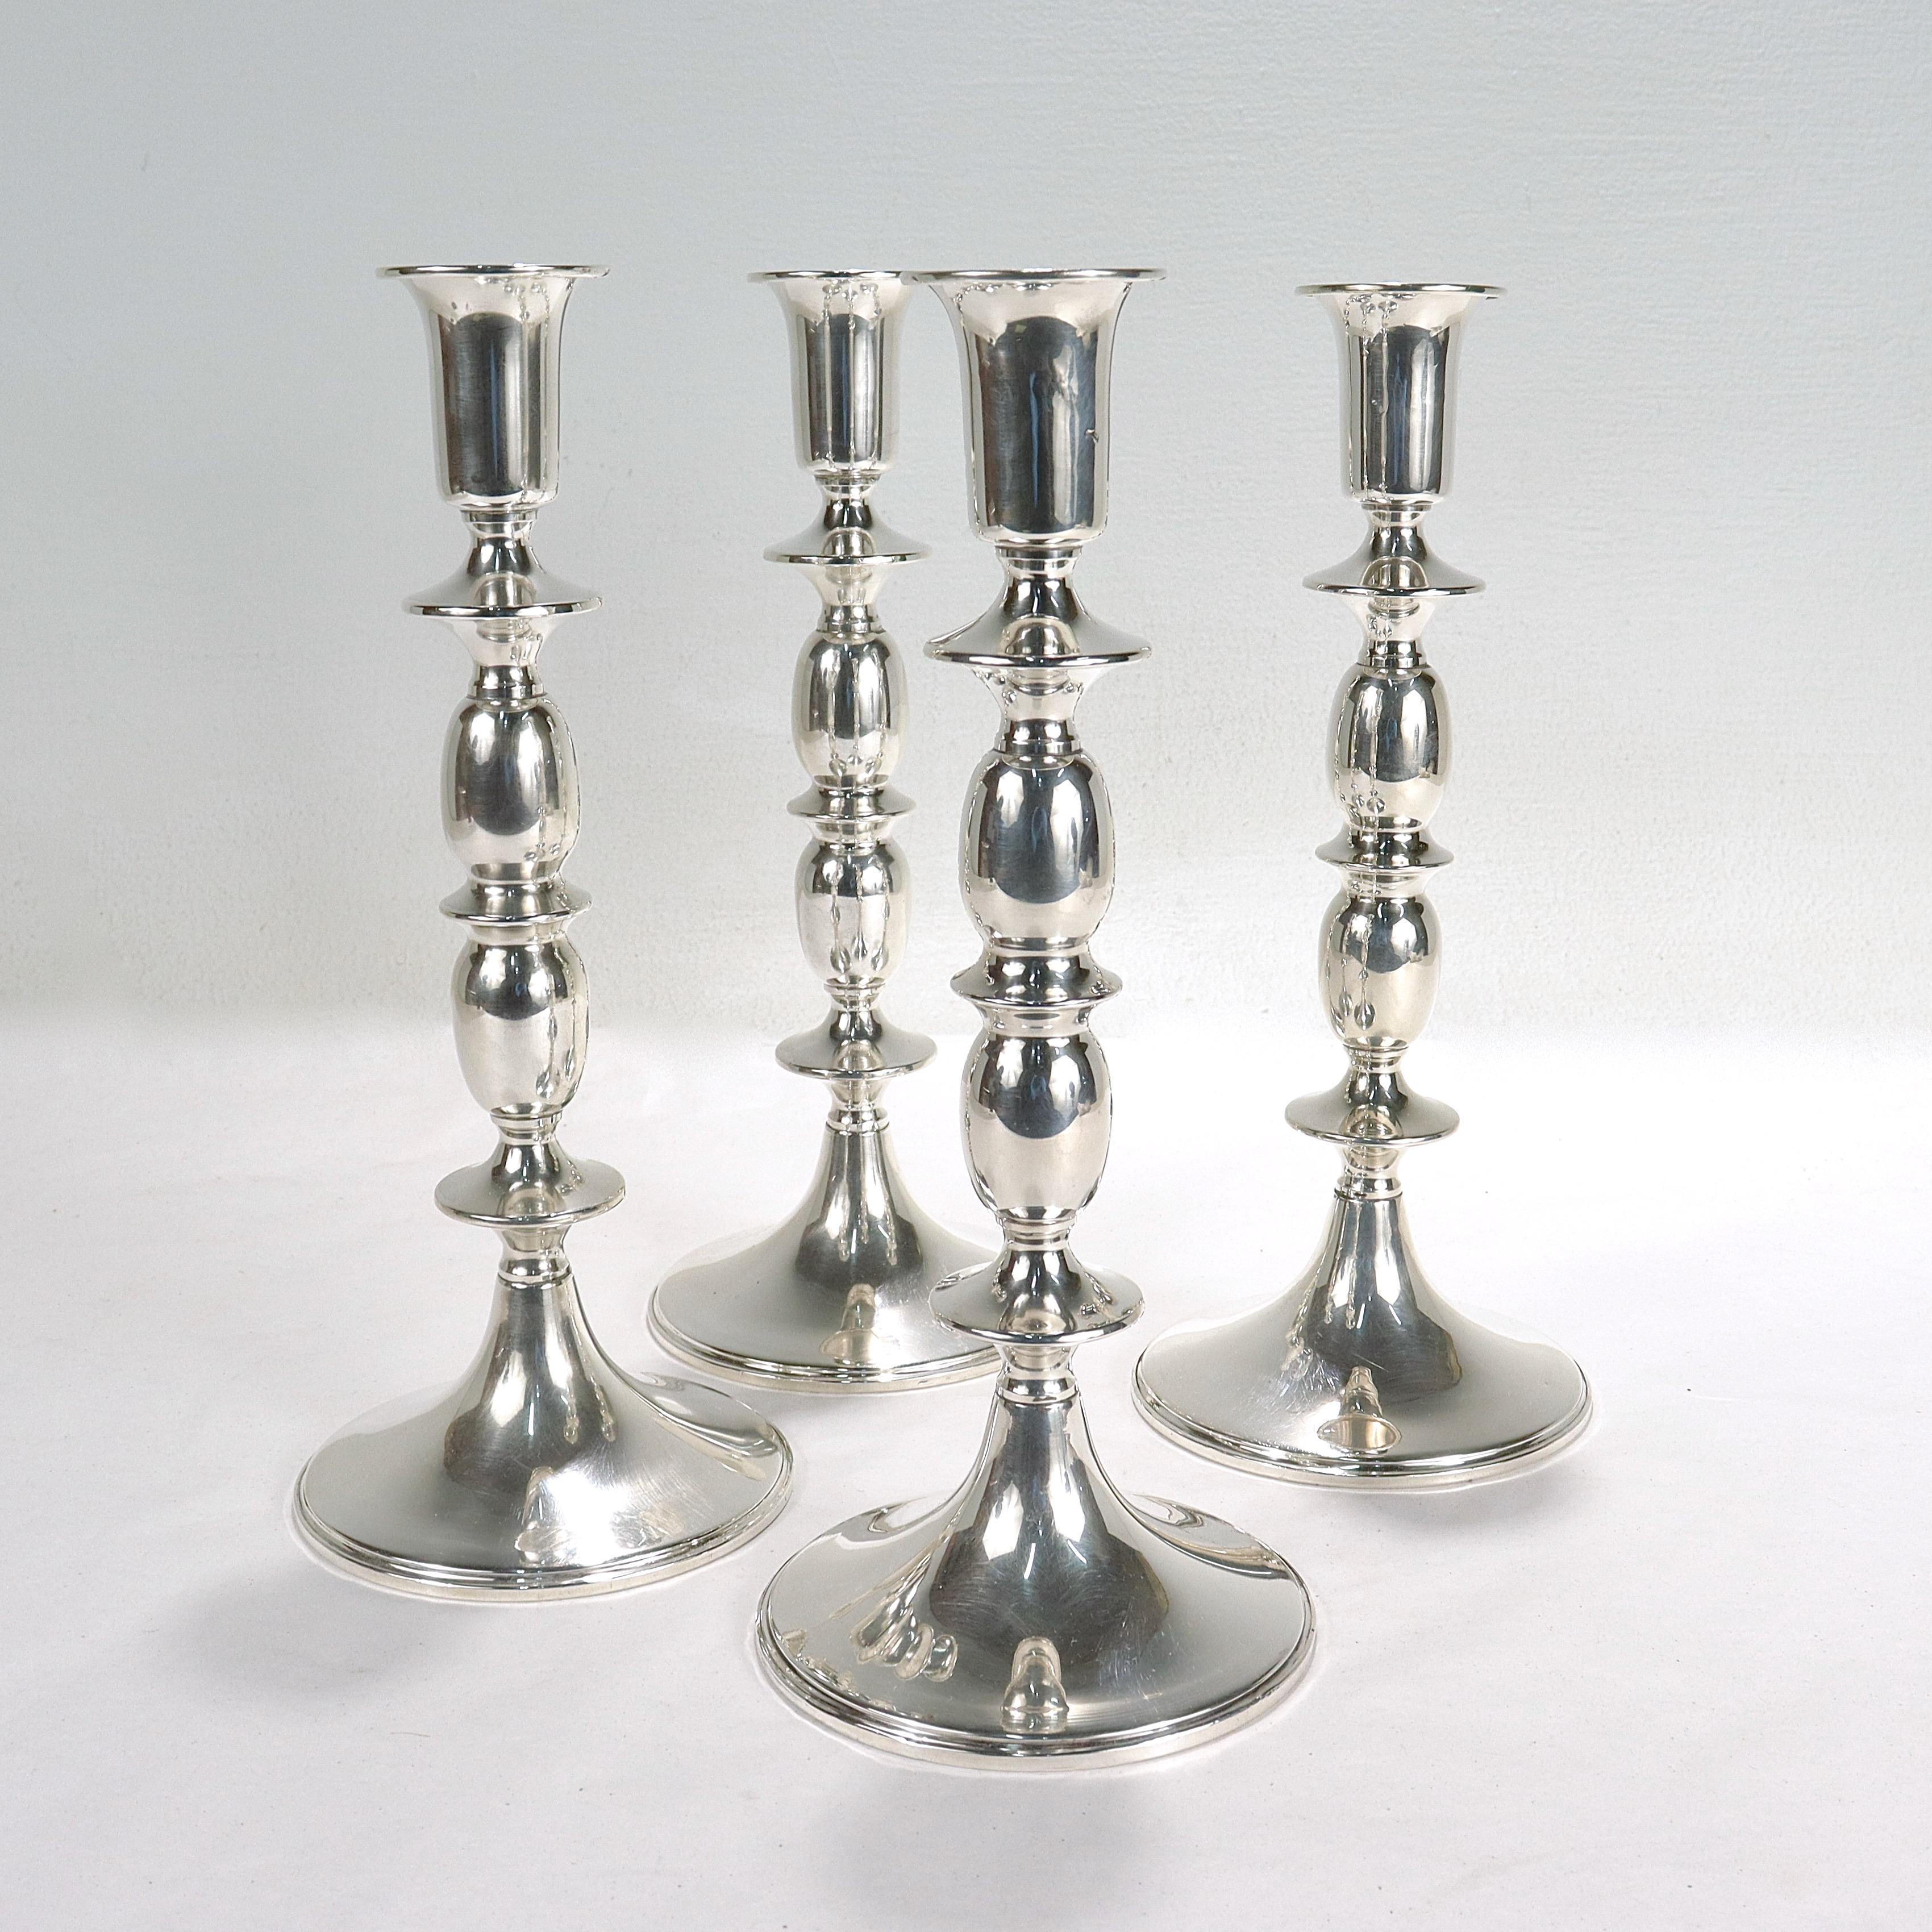 Set of 4 Matching Mid-Century Modern Sterling Silver Candlesticks/Candle Holders In Good Condition For Sale In Philadelphia, PA